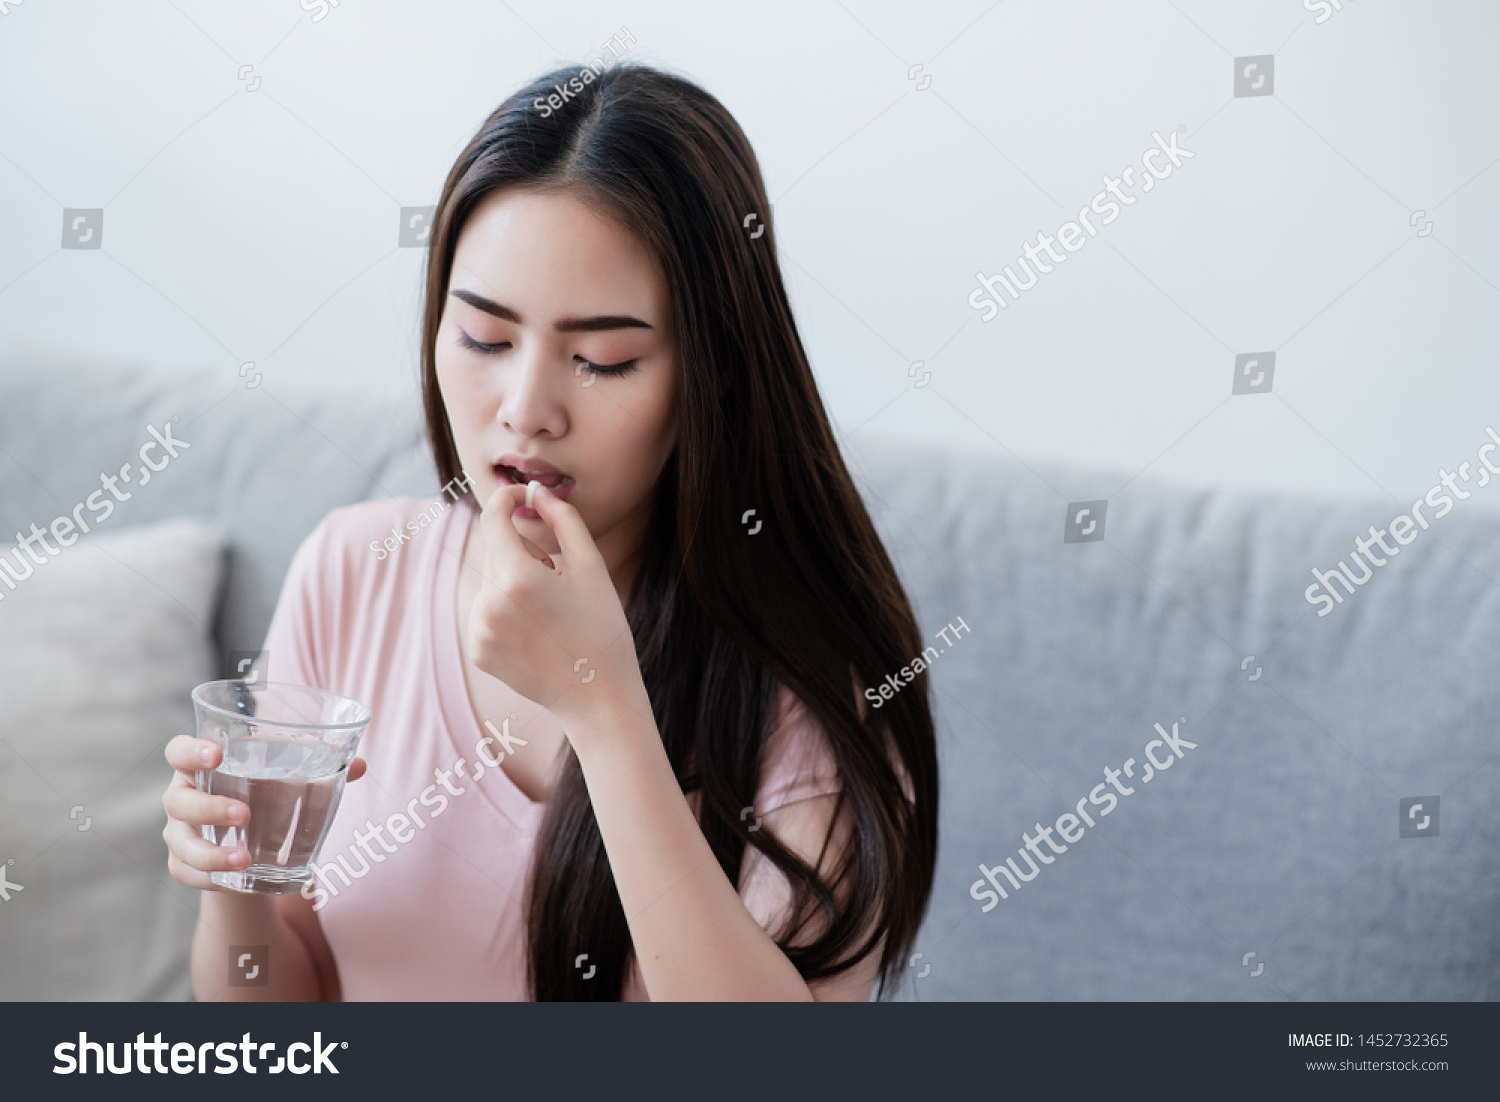 Sick woman eating pills with a glass of water in hand.
 #1452732365